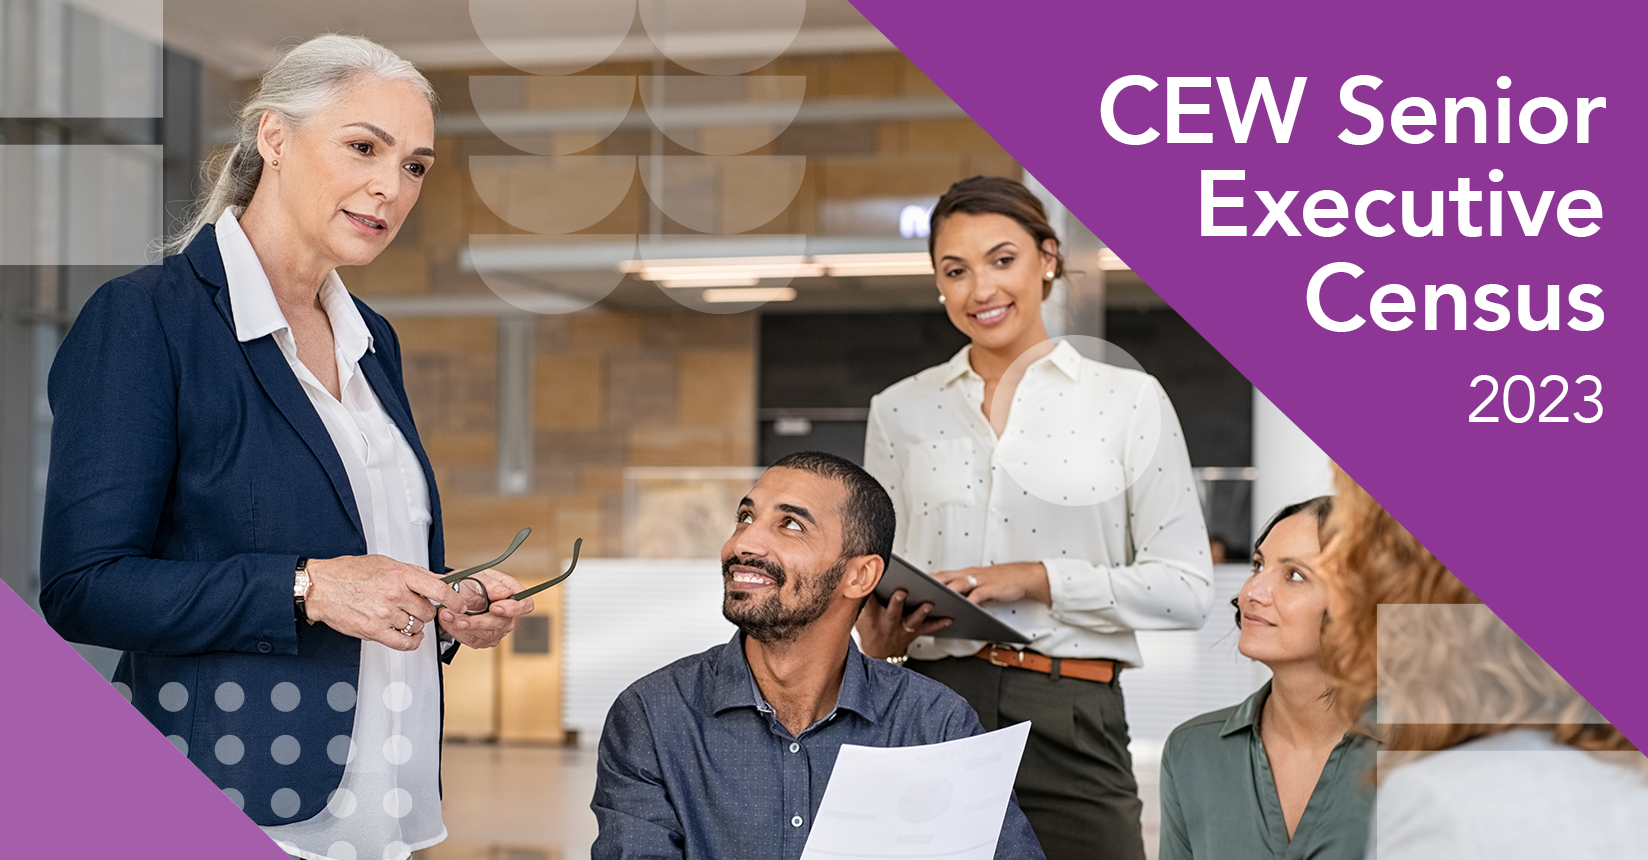 2023 CEW Census – gender equality is coming but not soon enough